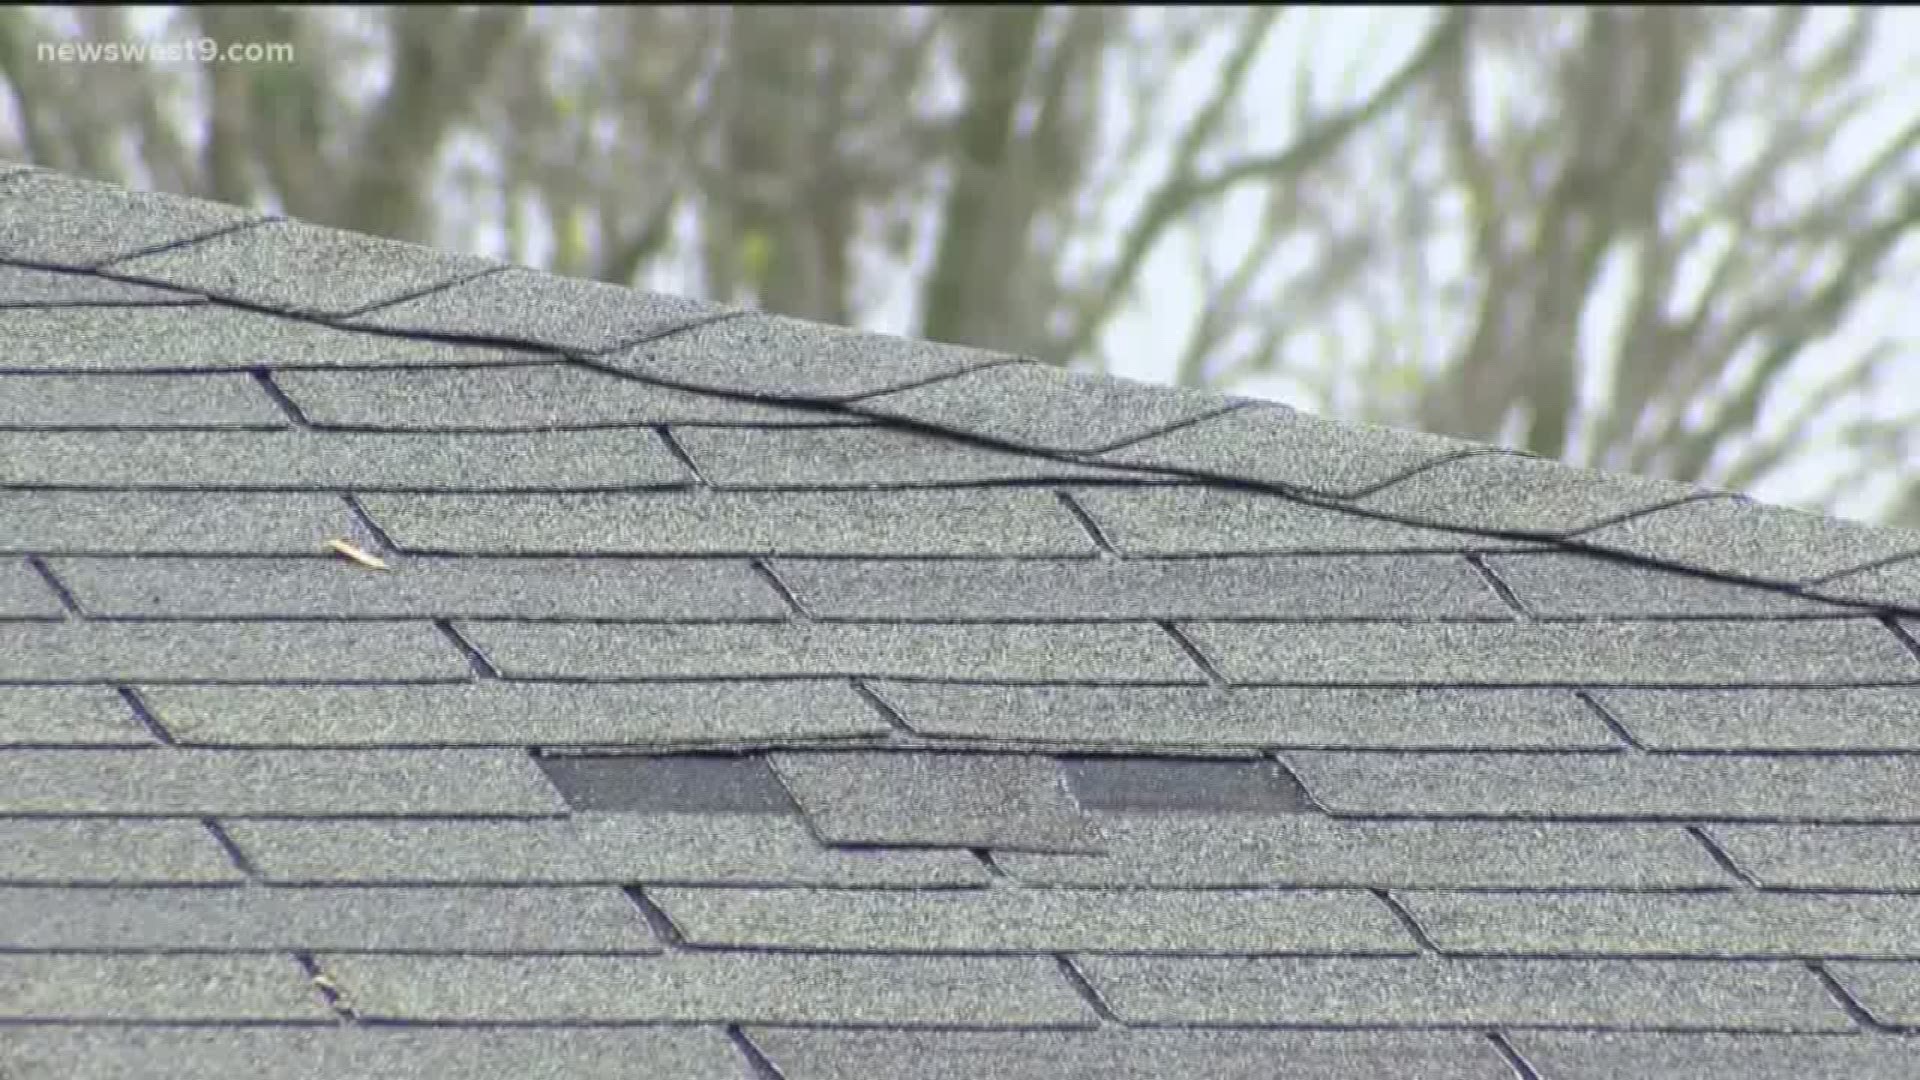 Local heating and cooling experts warn homeowners to make sure their flue vents are hooked up correctly.